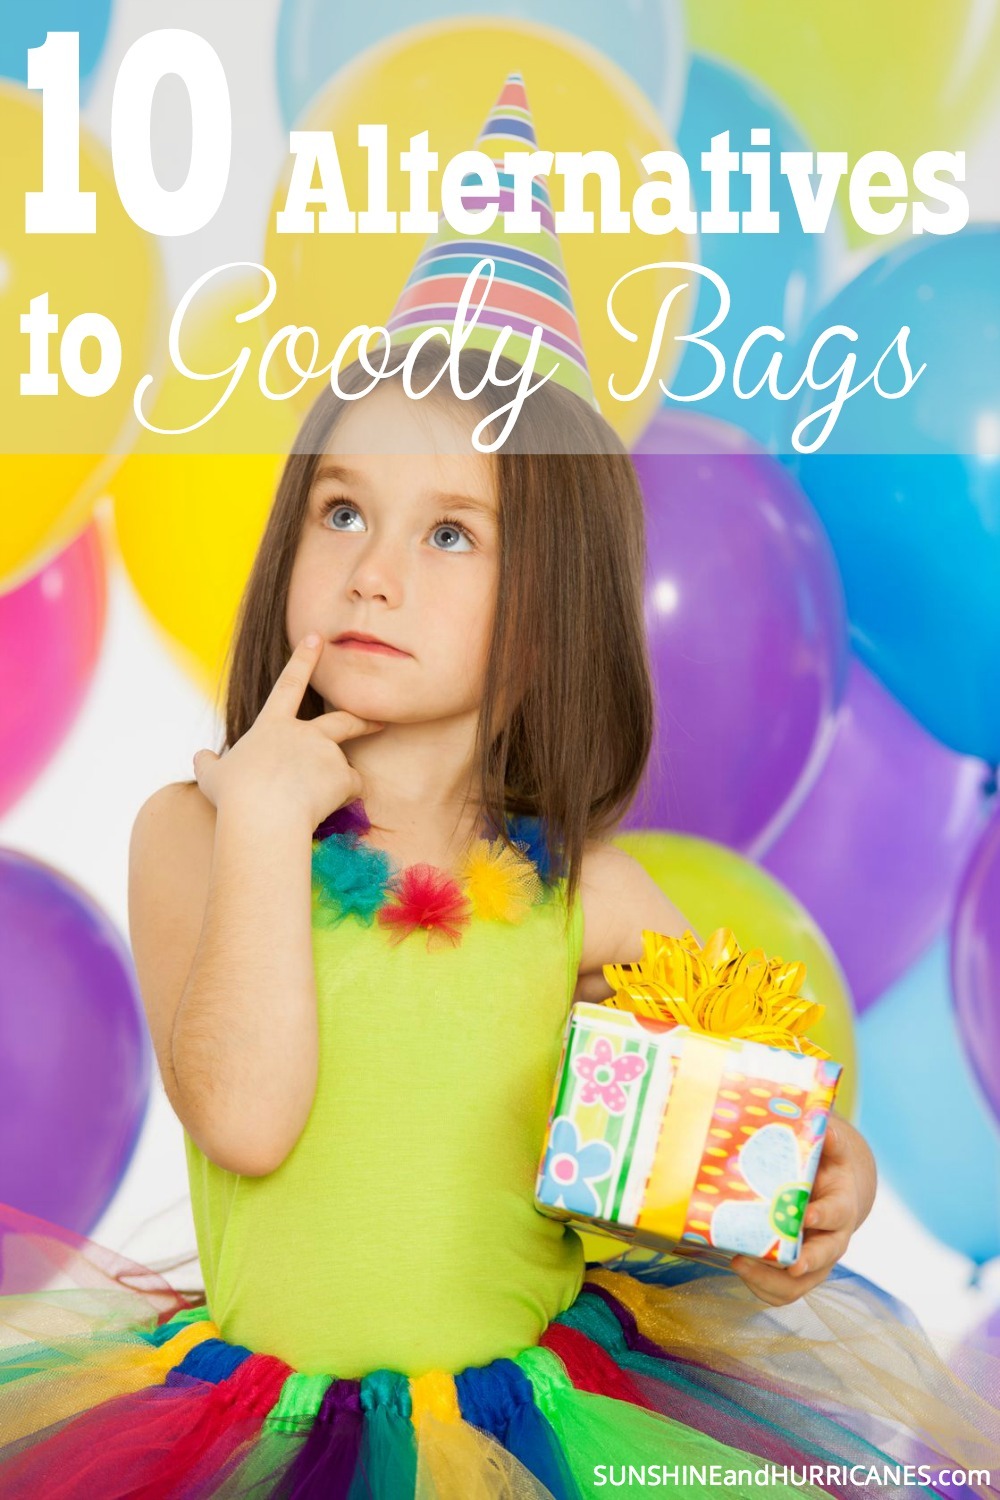 20 Creative Goodie Bag Ideas for Kids Birthday Parties on Love the Day